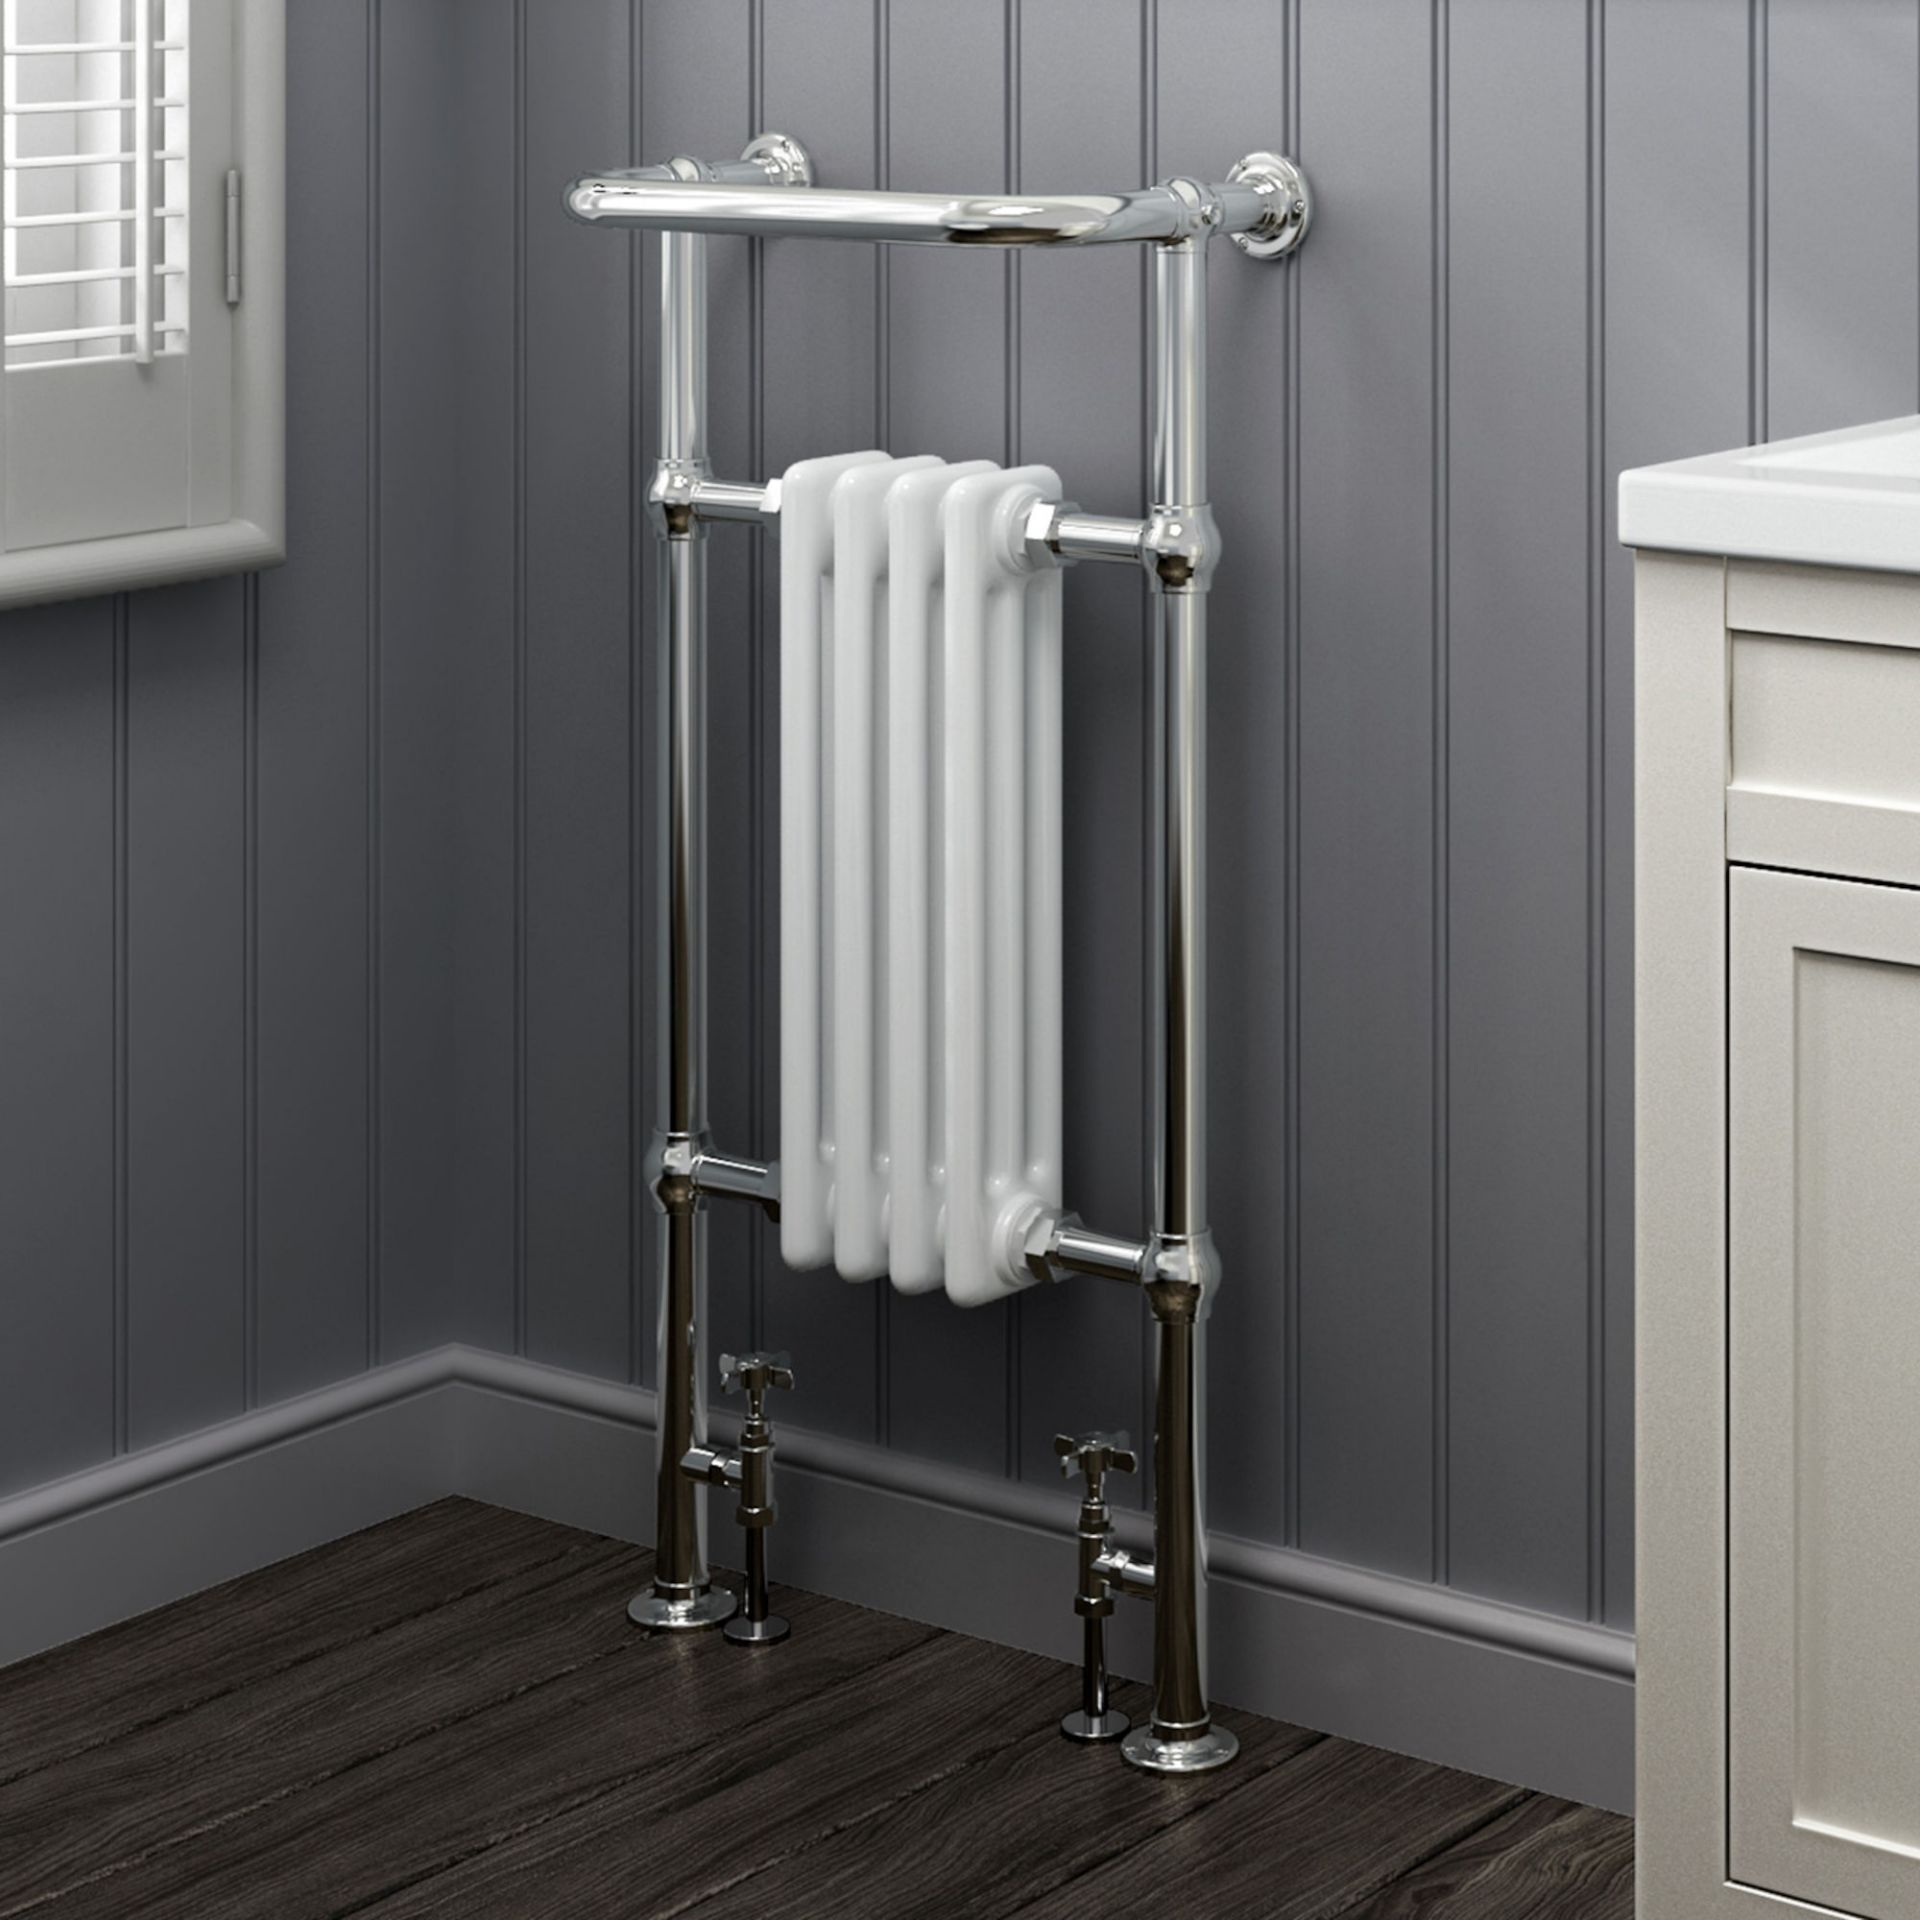 (OS216) 952x479mm Small Traditional White Towel Rail Radiator - Cambridge. We love this because it